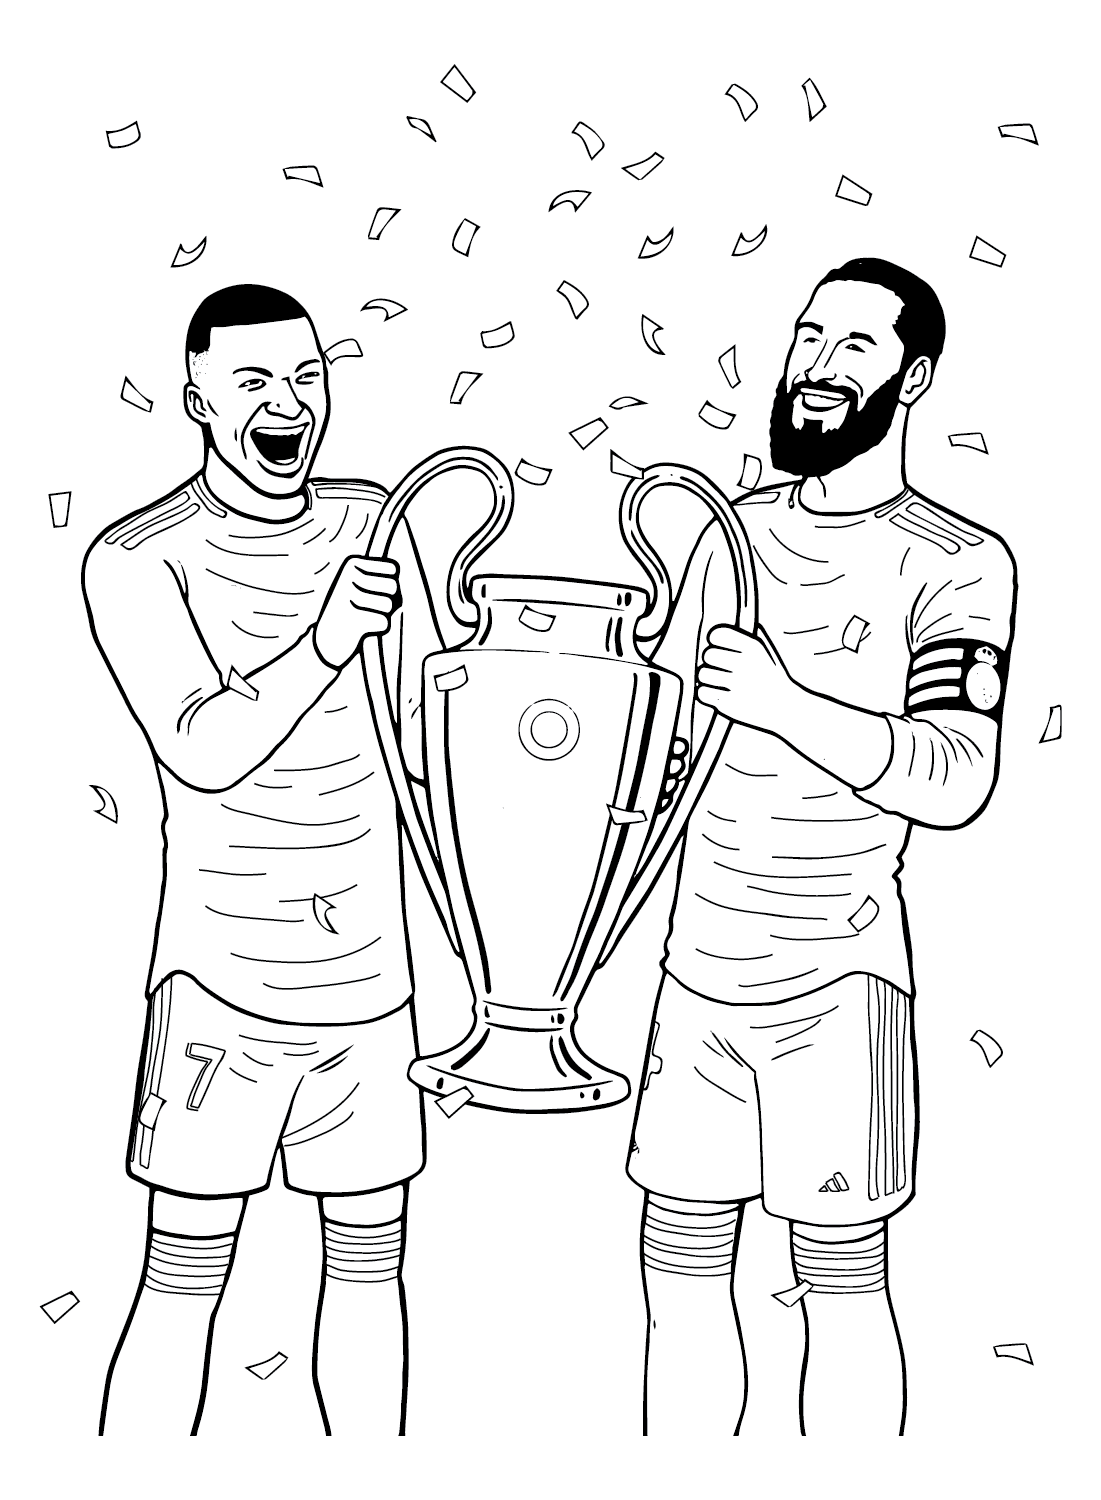 Pictures Kylian Mbappé Coloring Page - Free Printable Coloring Pages